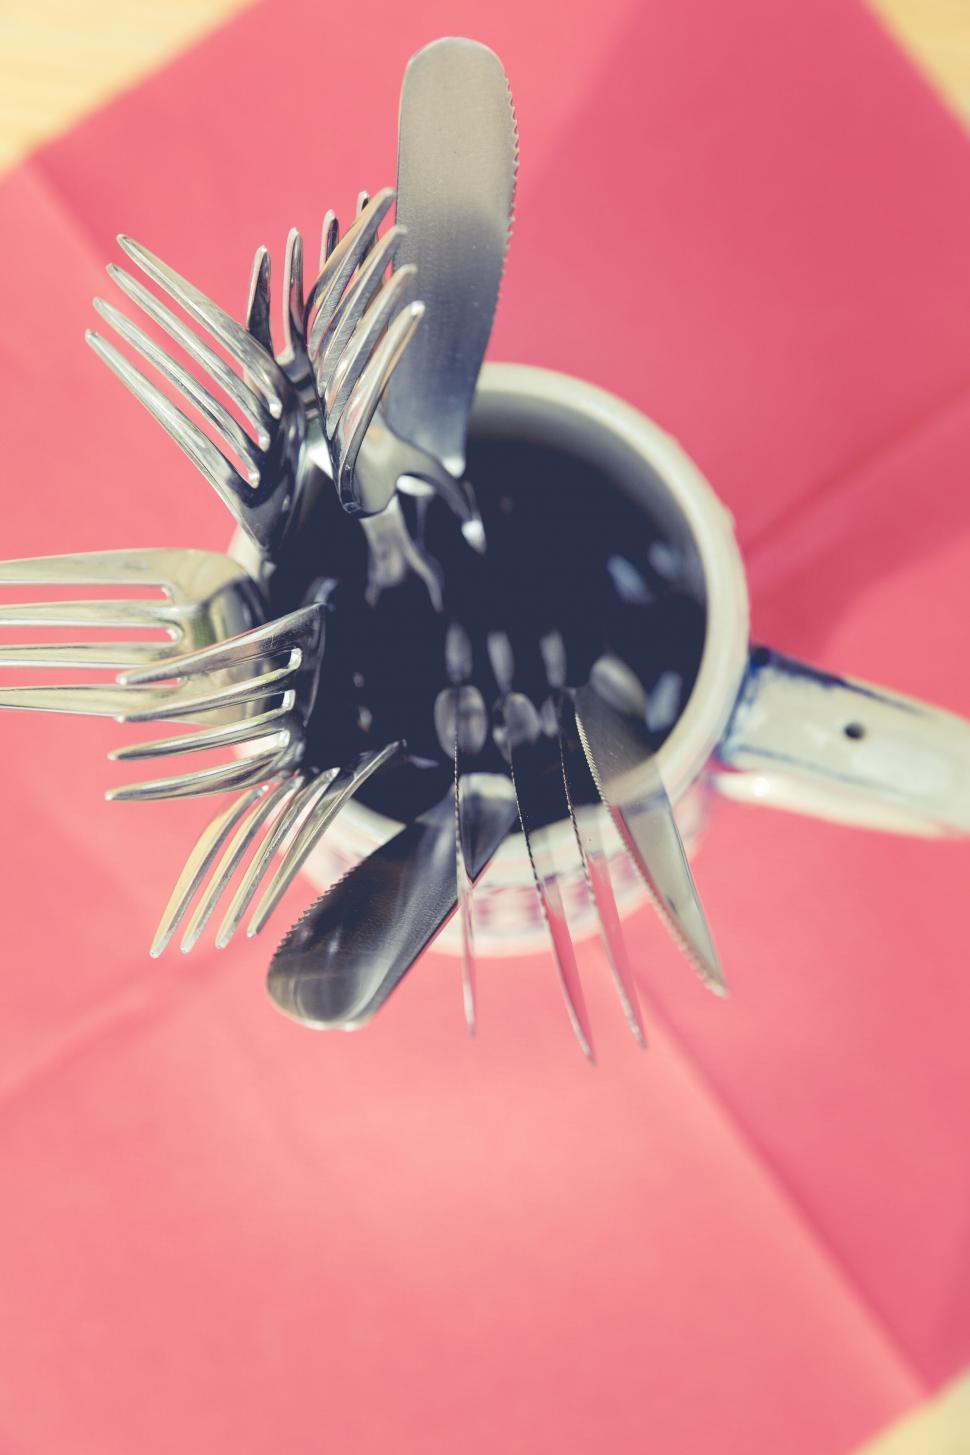 Free Image of Cutlery organized in a cup on a red napkin 